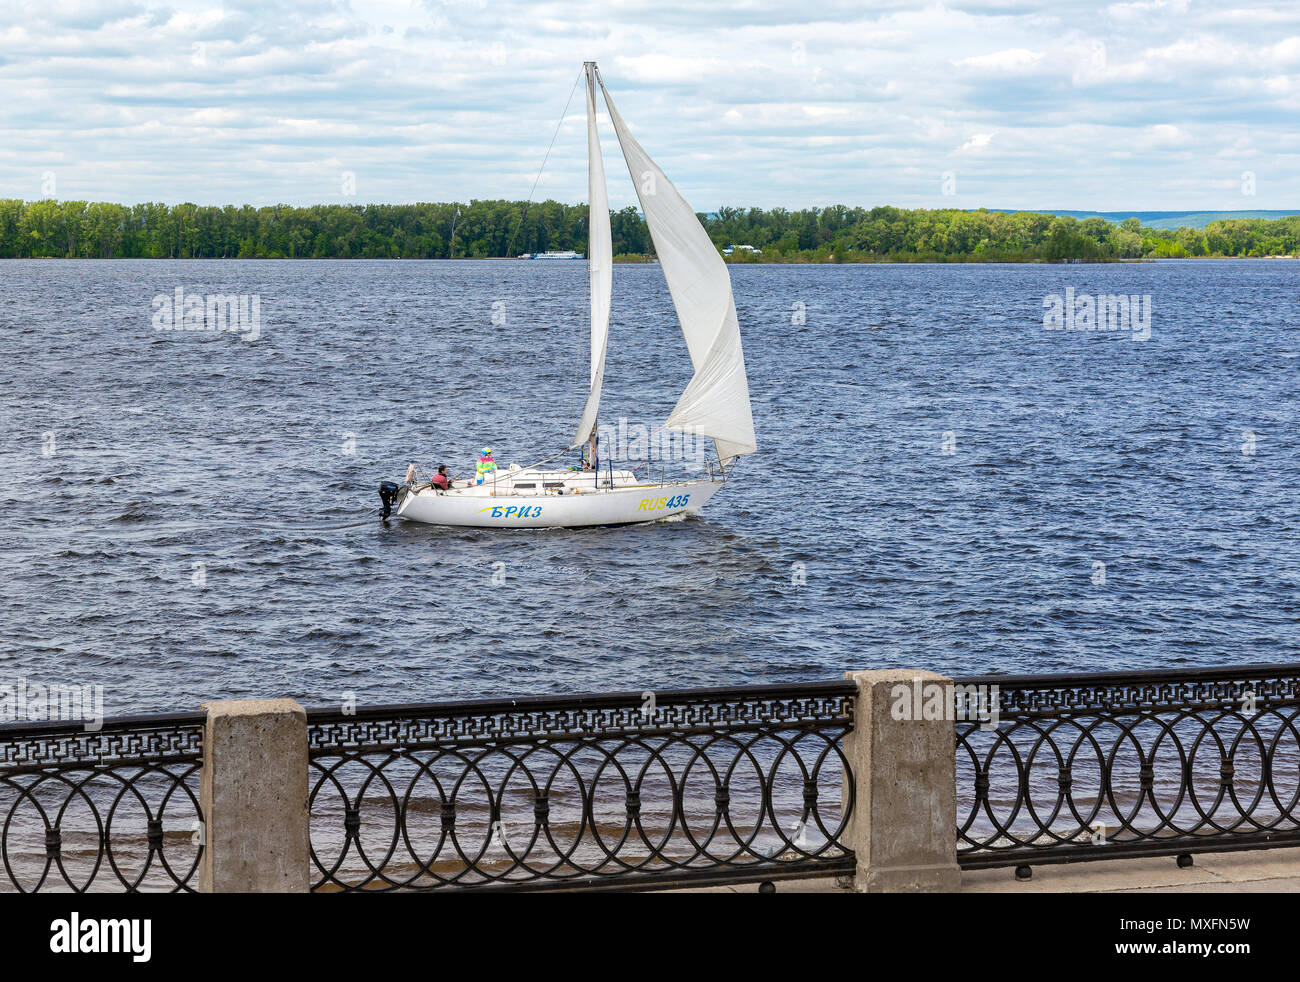 Samara, Russia - June 2, 2018: Sailing yacht floating on the Volga river in the summer sunny day Stock Photo